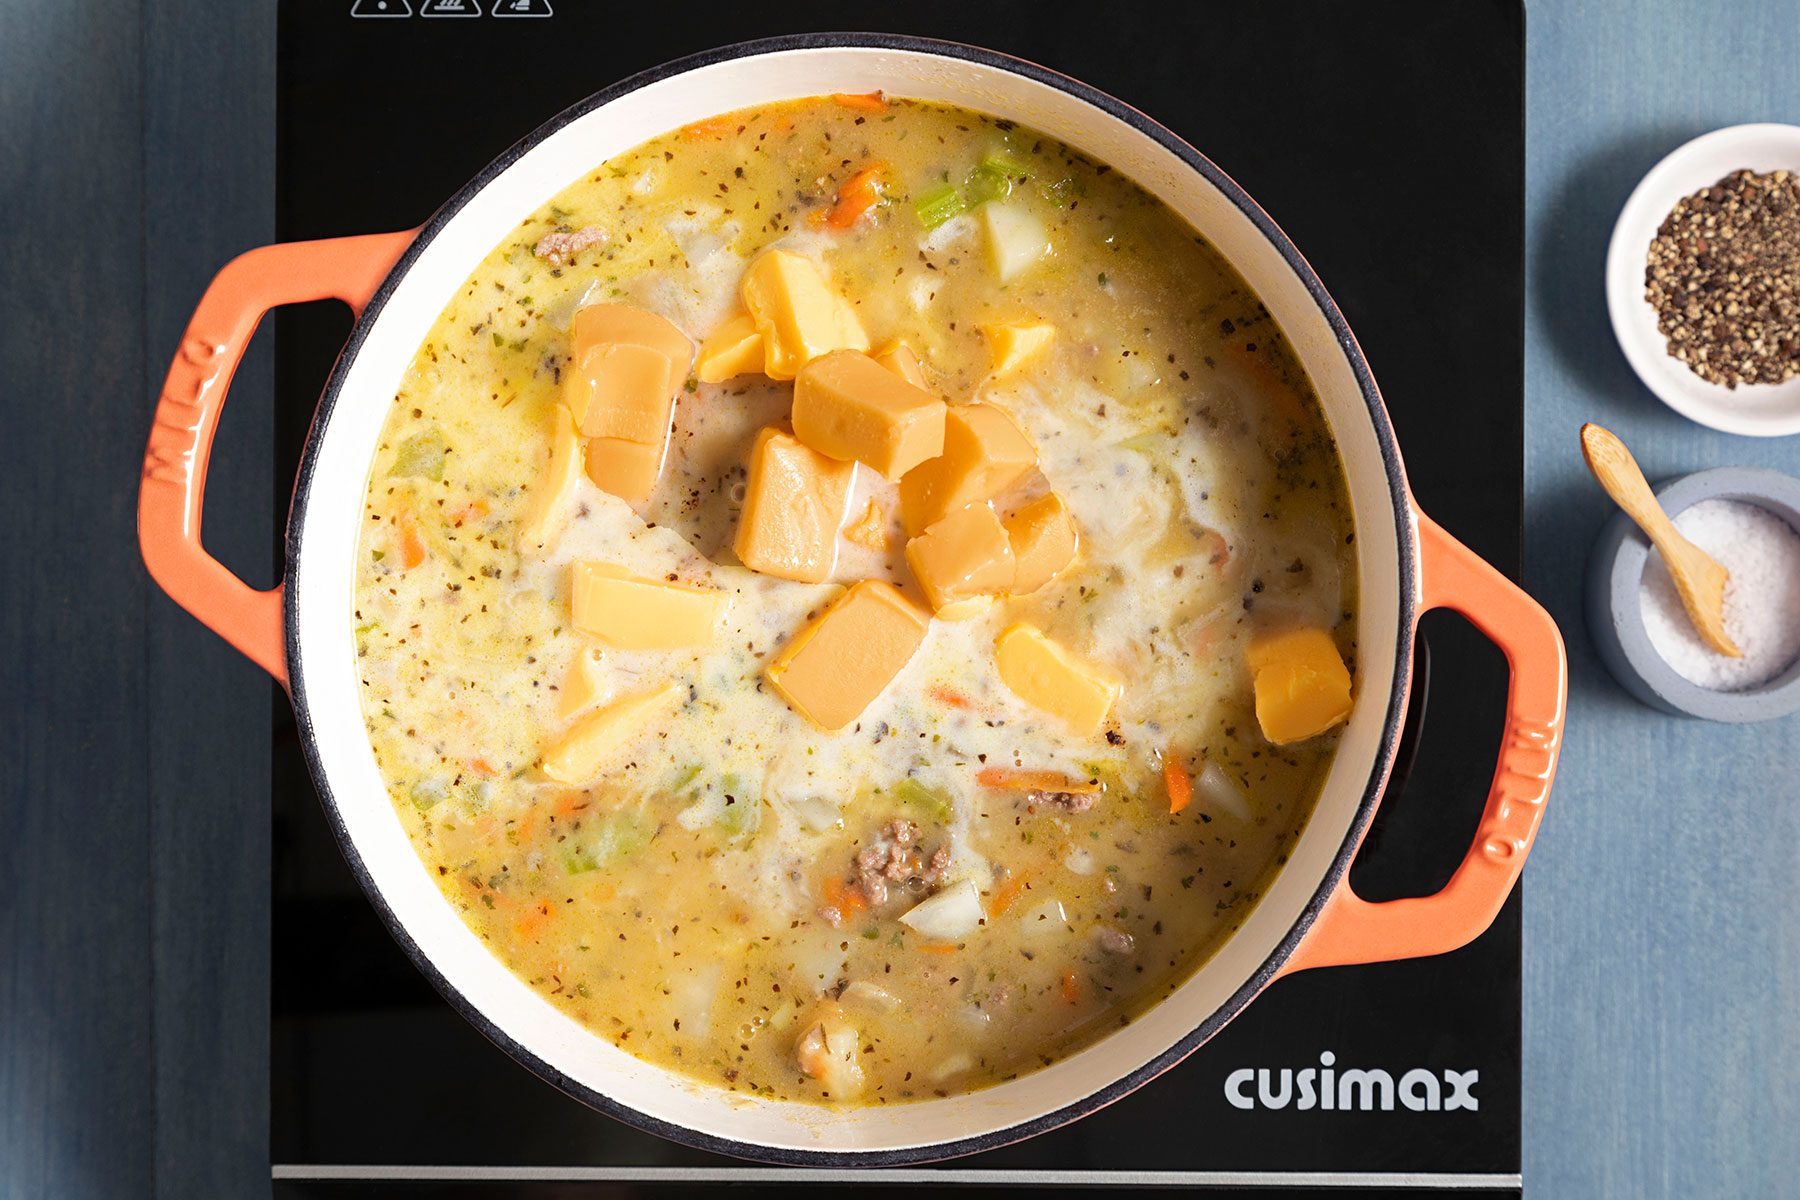 Cheese cubes melting in pot full of soup